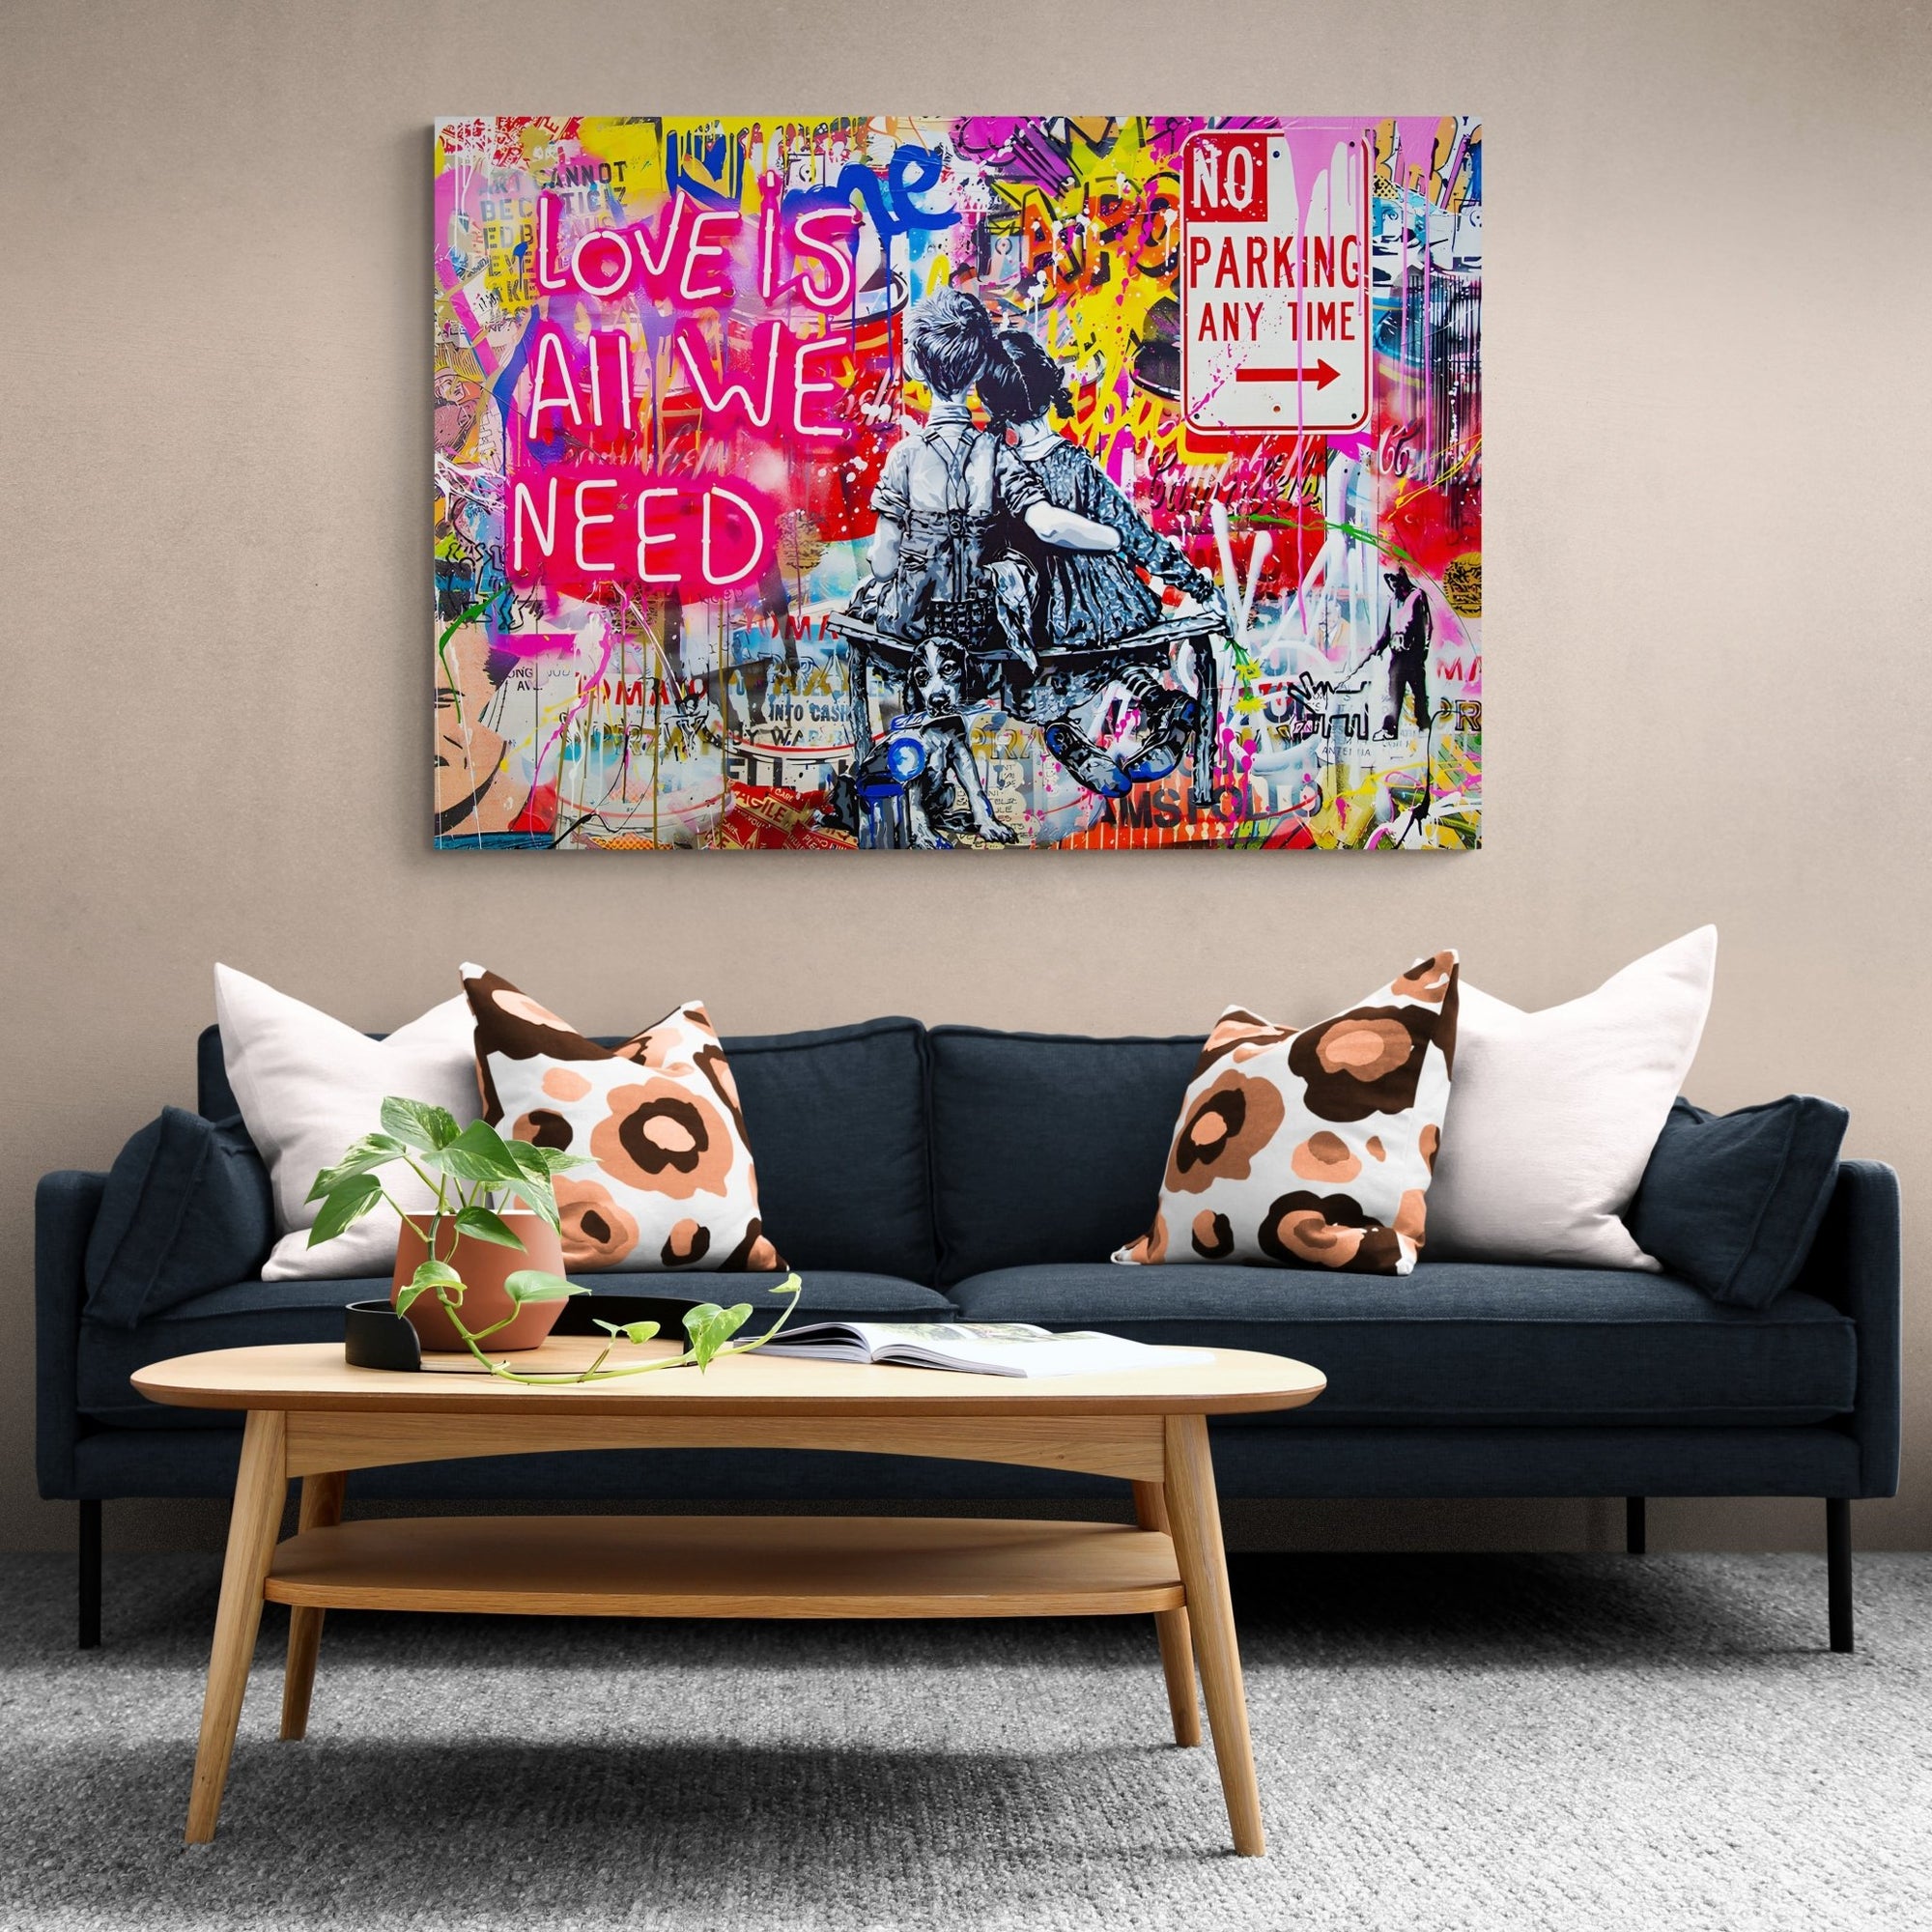 Love Is All We Need Wall Art - The Trendy Art